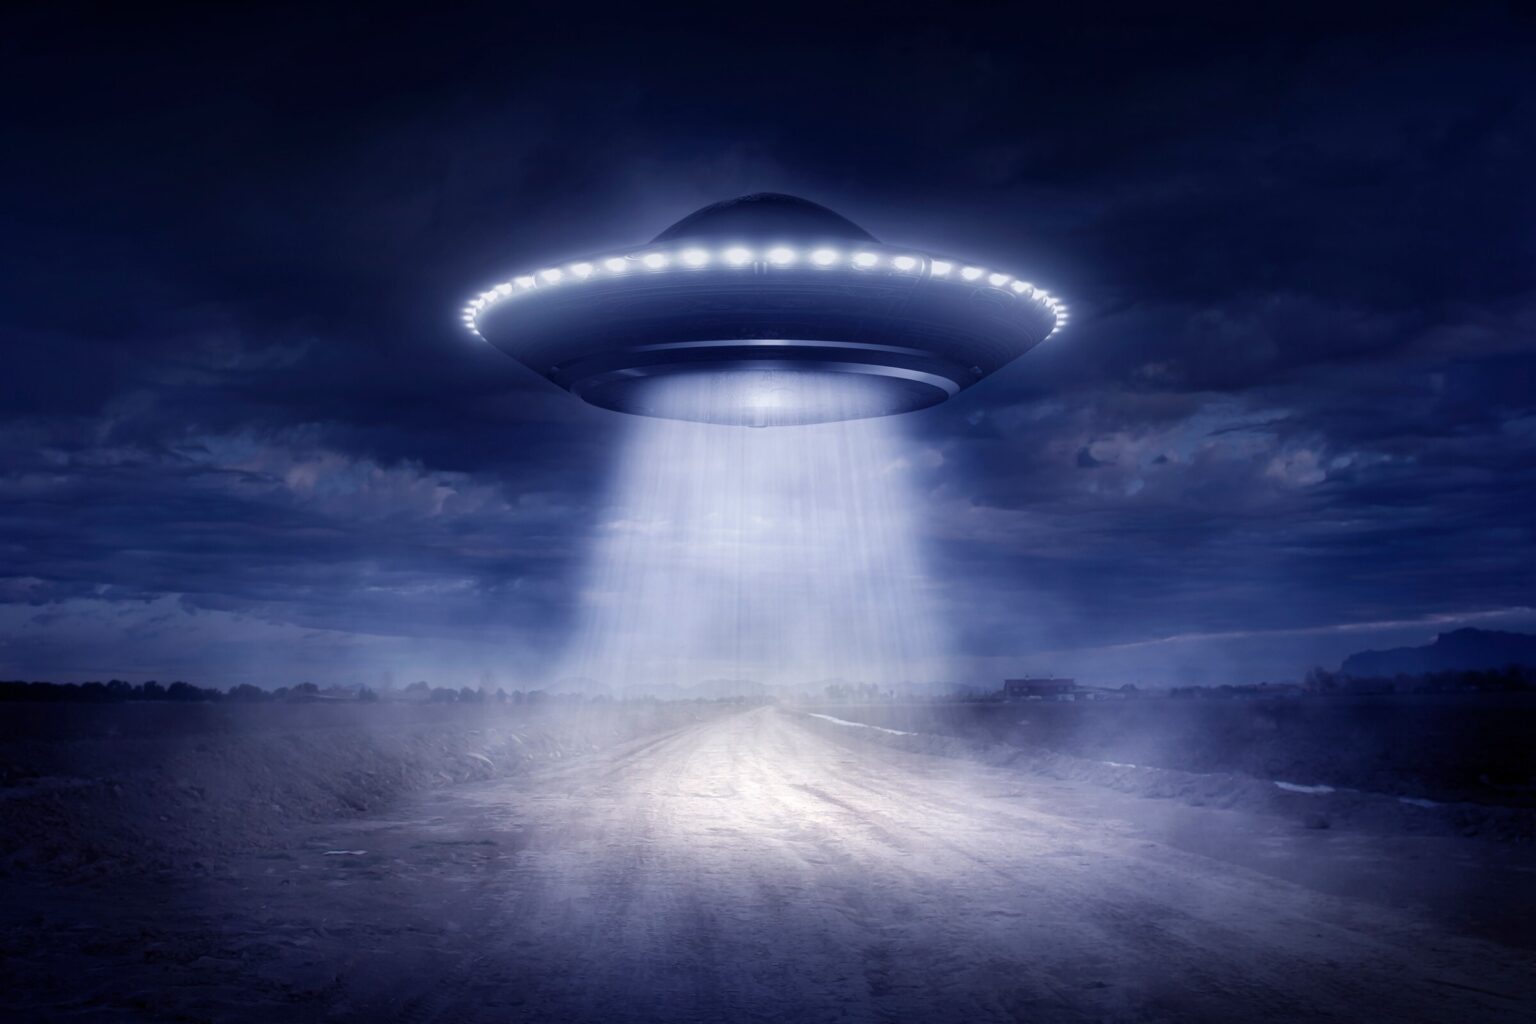 UFO sightings is usually a game one could play if they were looking at the sky. Check out what these alien hunters may have discovered.